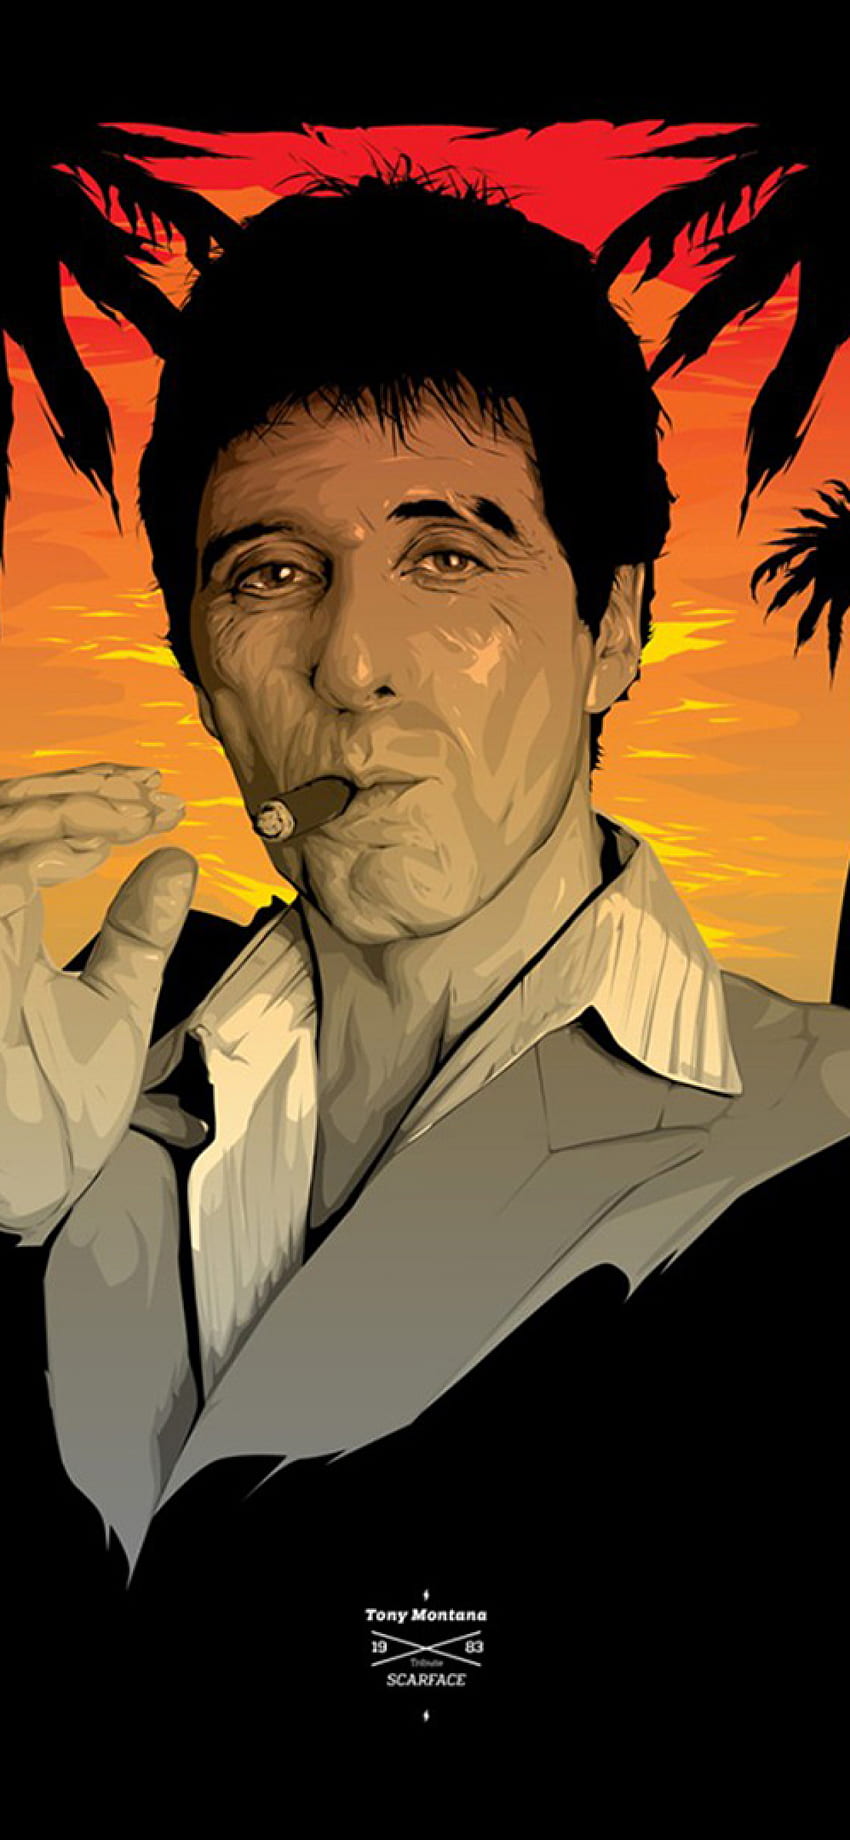 Scarface, Tony Montana for iPhone 11 Pro Max & XS Max HD phone wallpaper